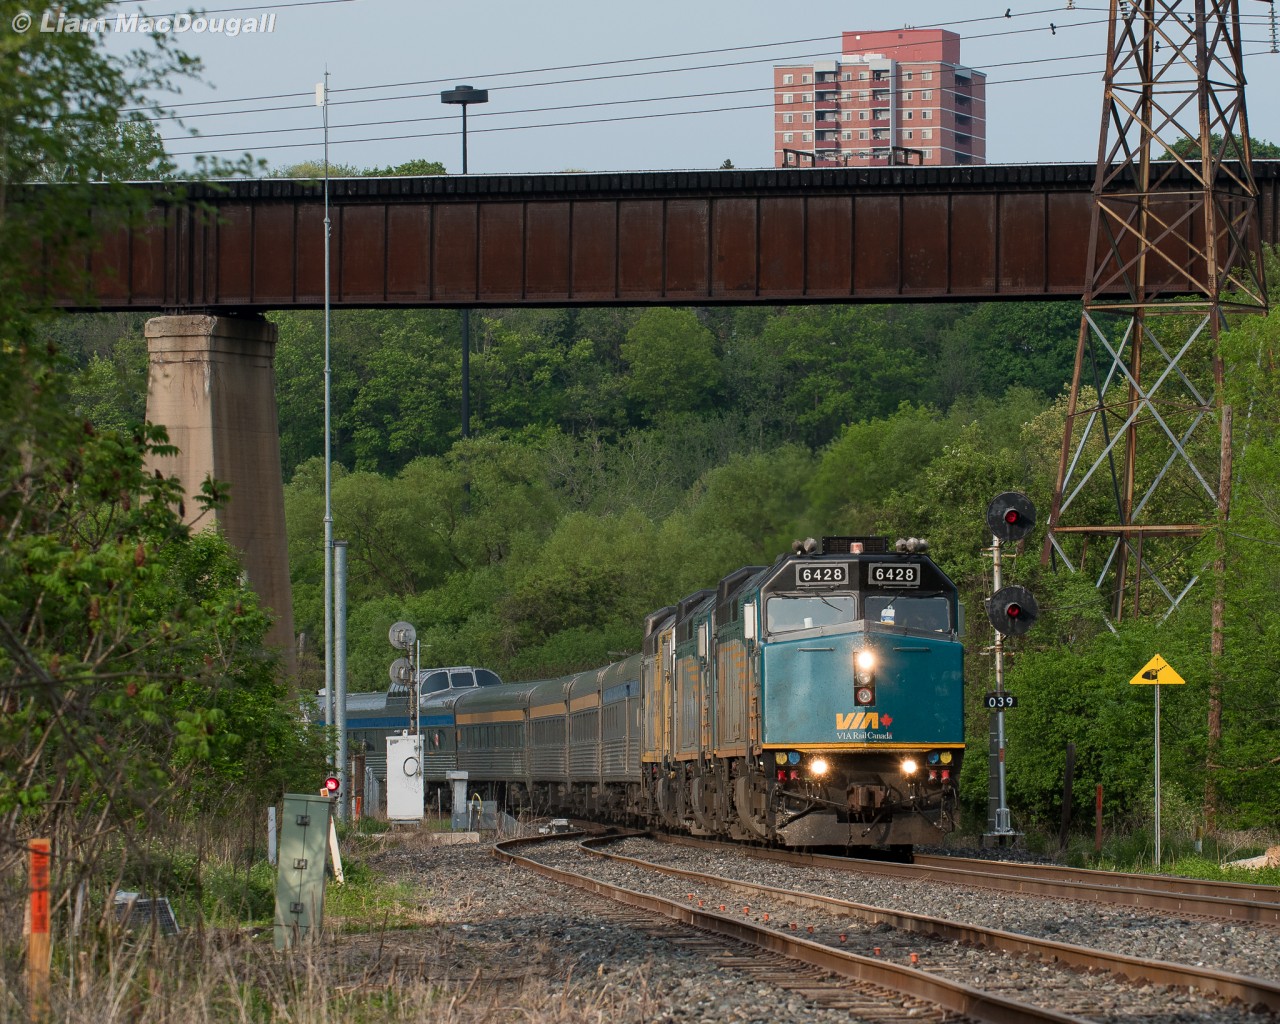 After not running for over 14 months, “The Canadian” finally returned to Toronto today, and is seen here snaking through the Don Valley splitting the searchlights at the north side of Rosedale Siding. Above is the massive viaduct hosting the Abandoned CPR (now Metrolinx-owned) Don Branch.